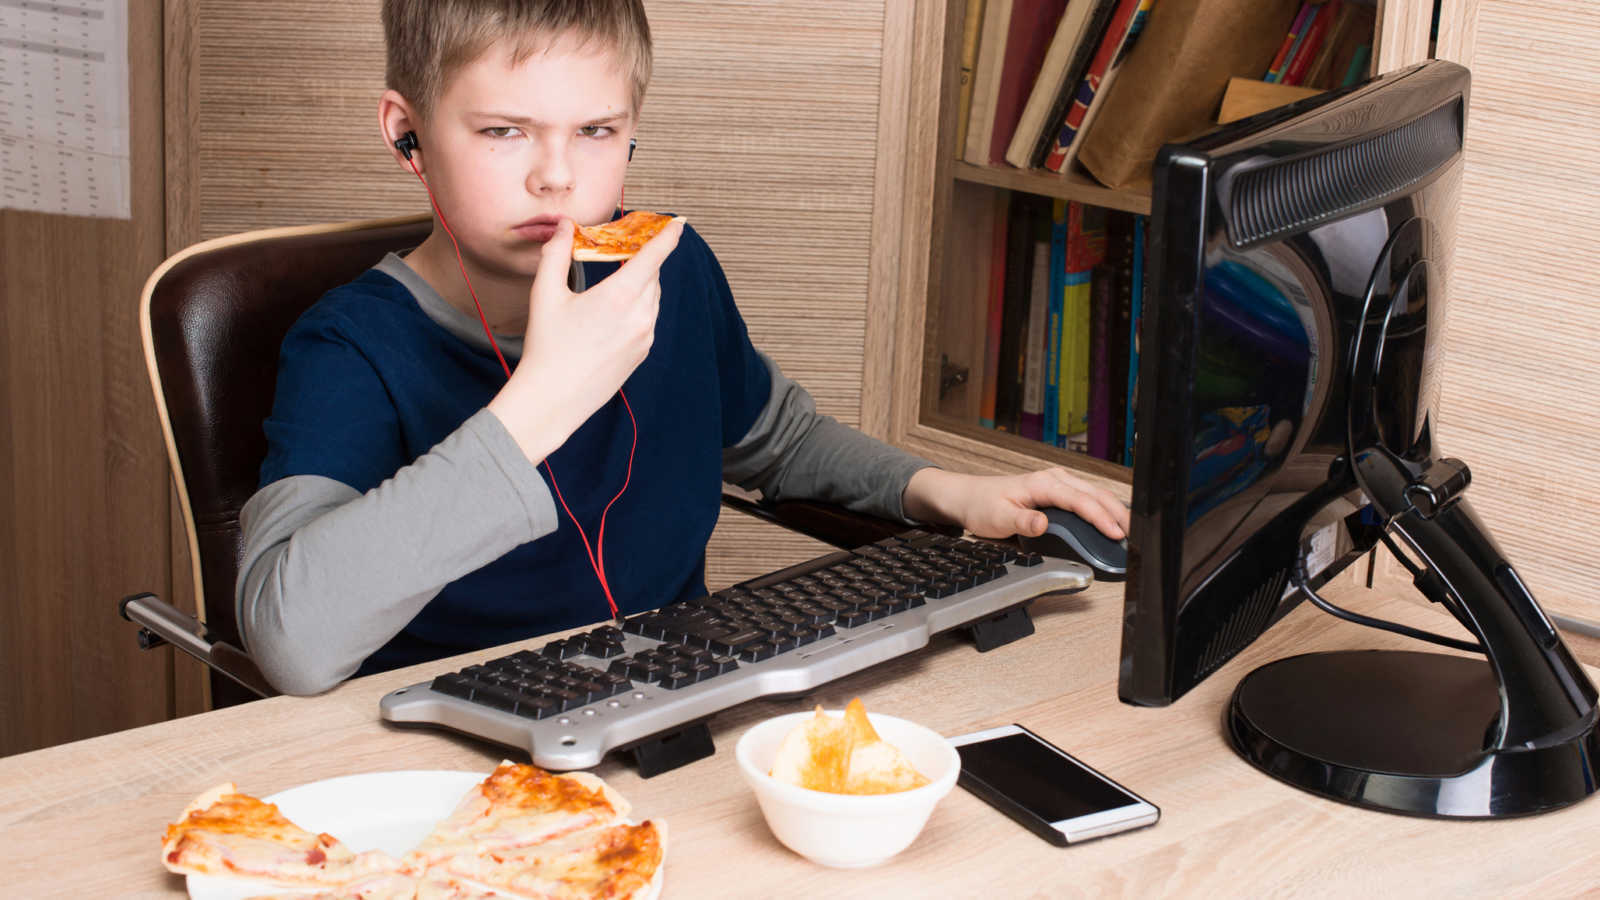 young boy eats pizza while using computer and looking irritated